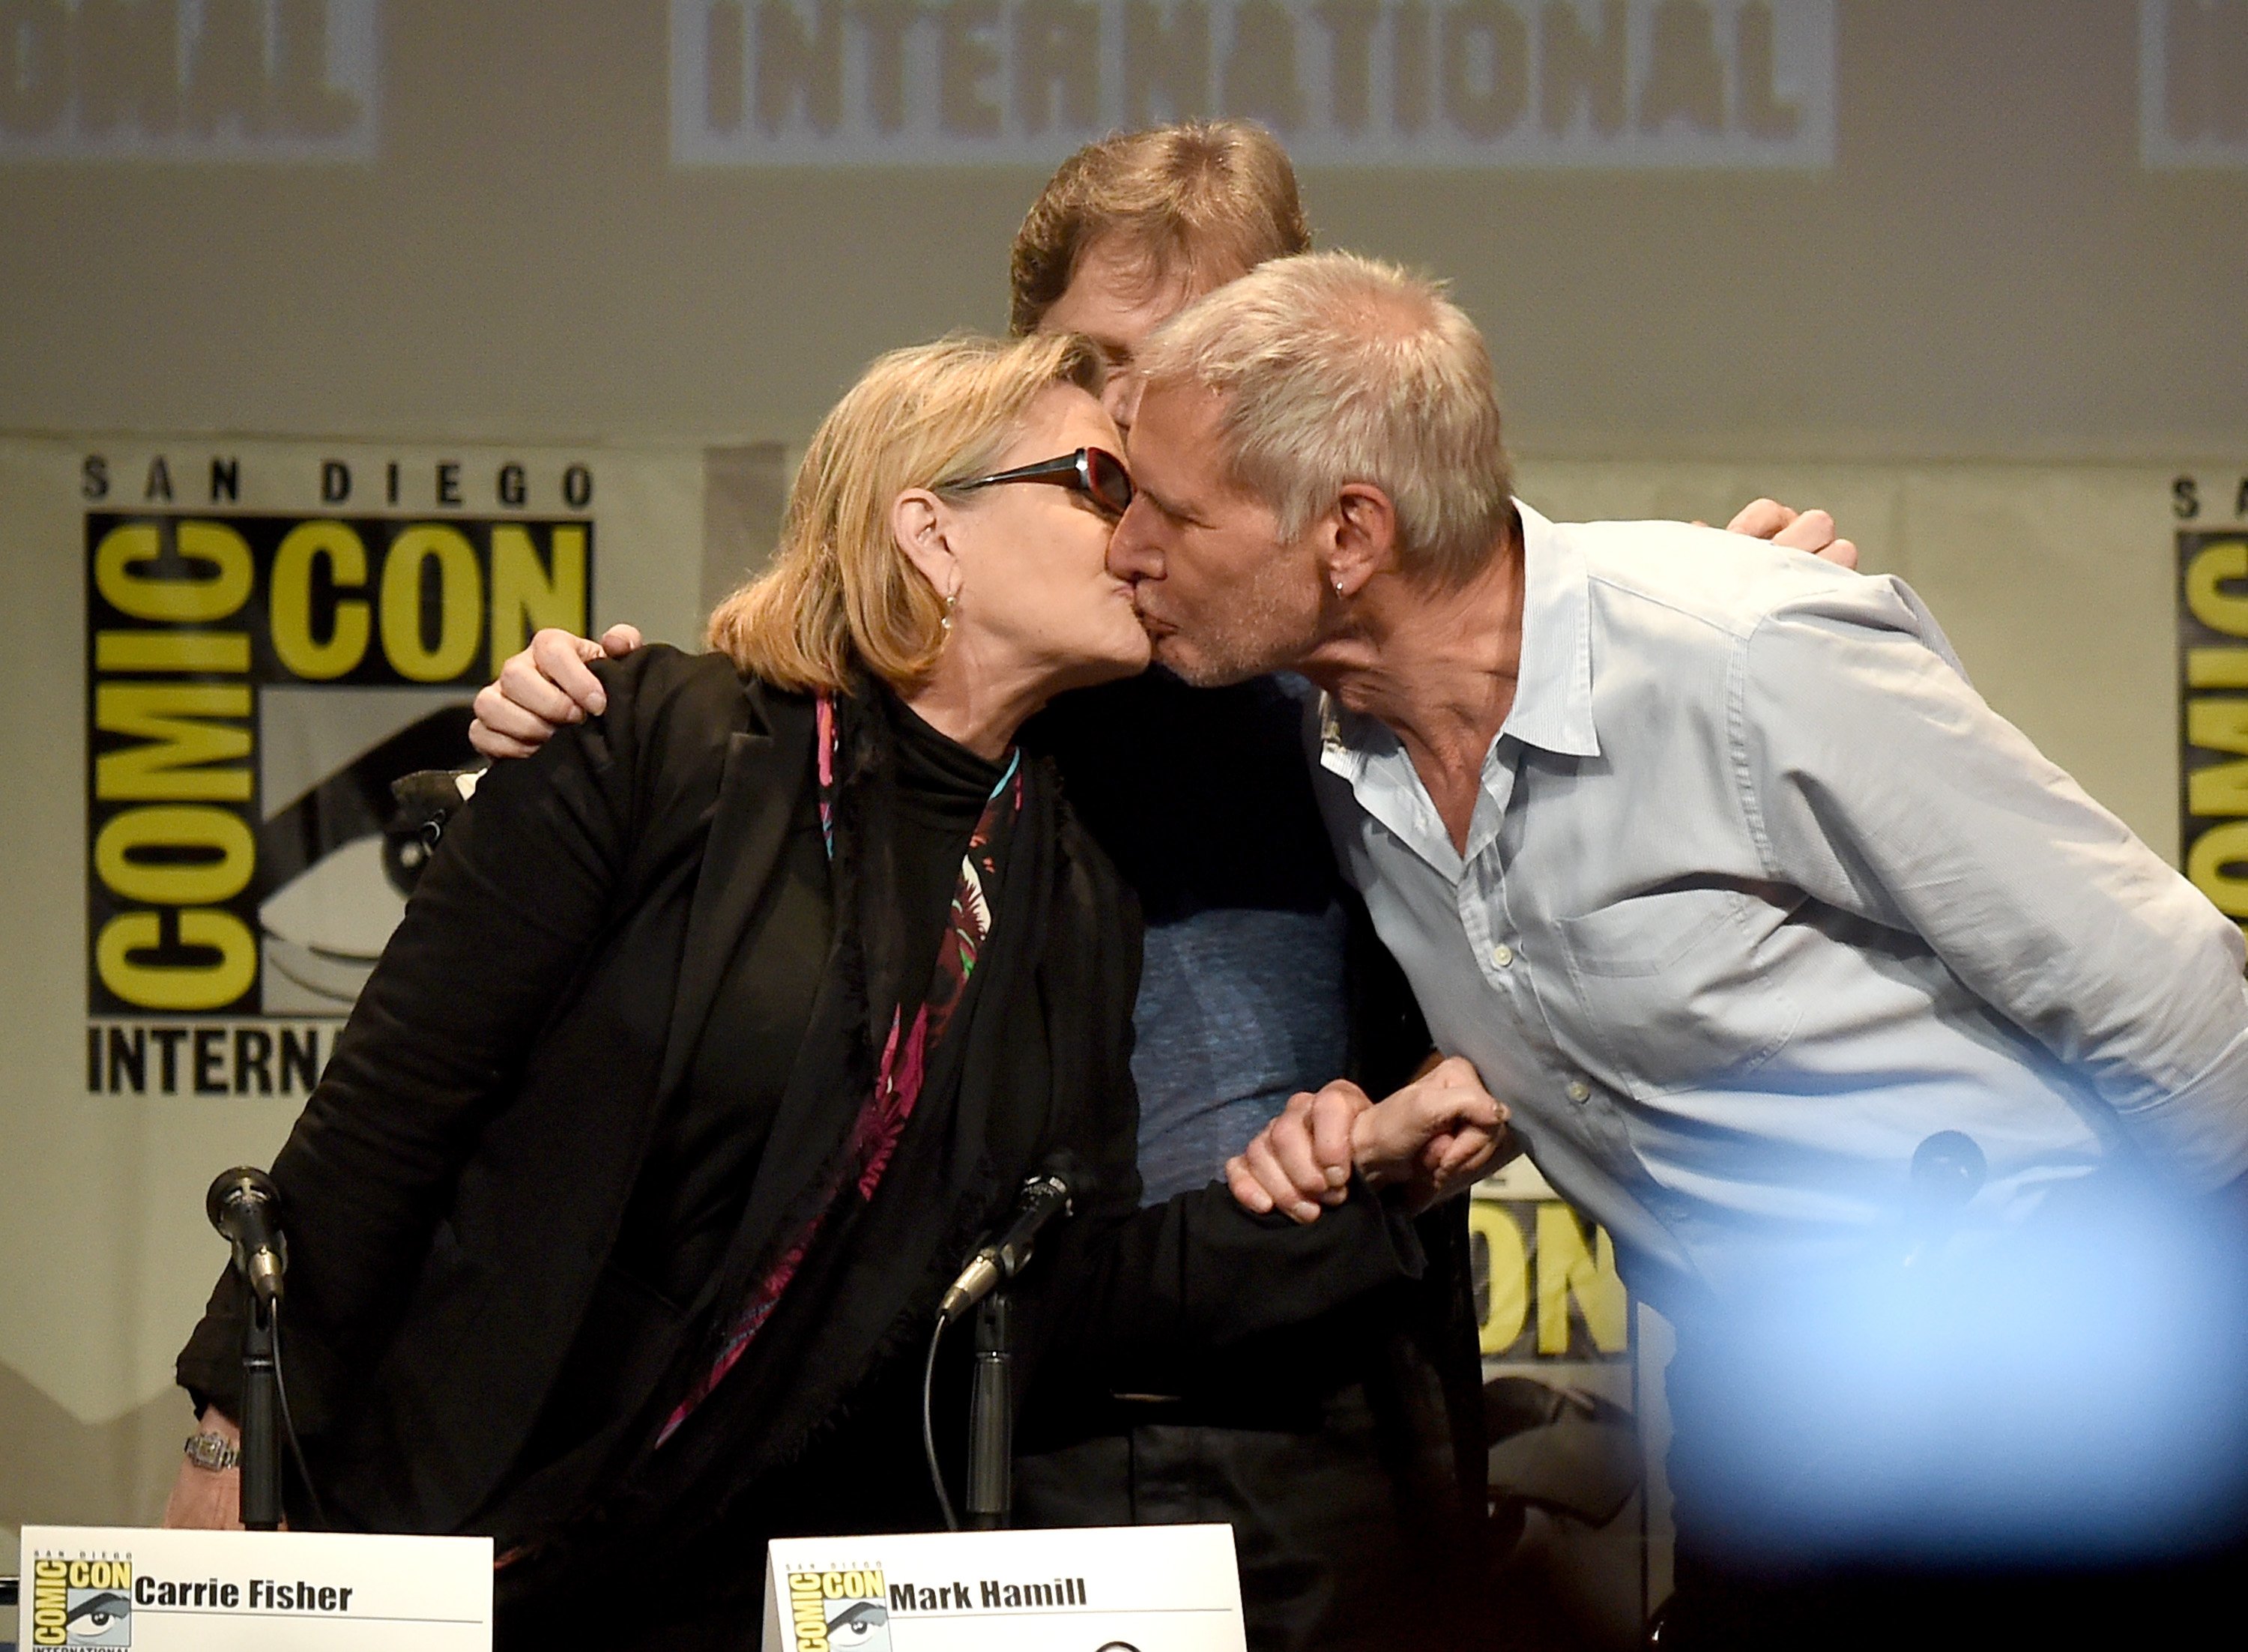 Actors Carrie Fisher, Mark Hamill and Harrison Ford pose onstage at the Lucasfilm panel during Comic-Con International 2015 at the San Diego Convention Center on July 10, 2015 in San Diego, California.